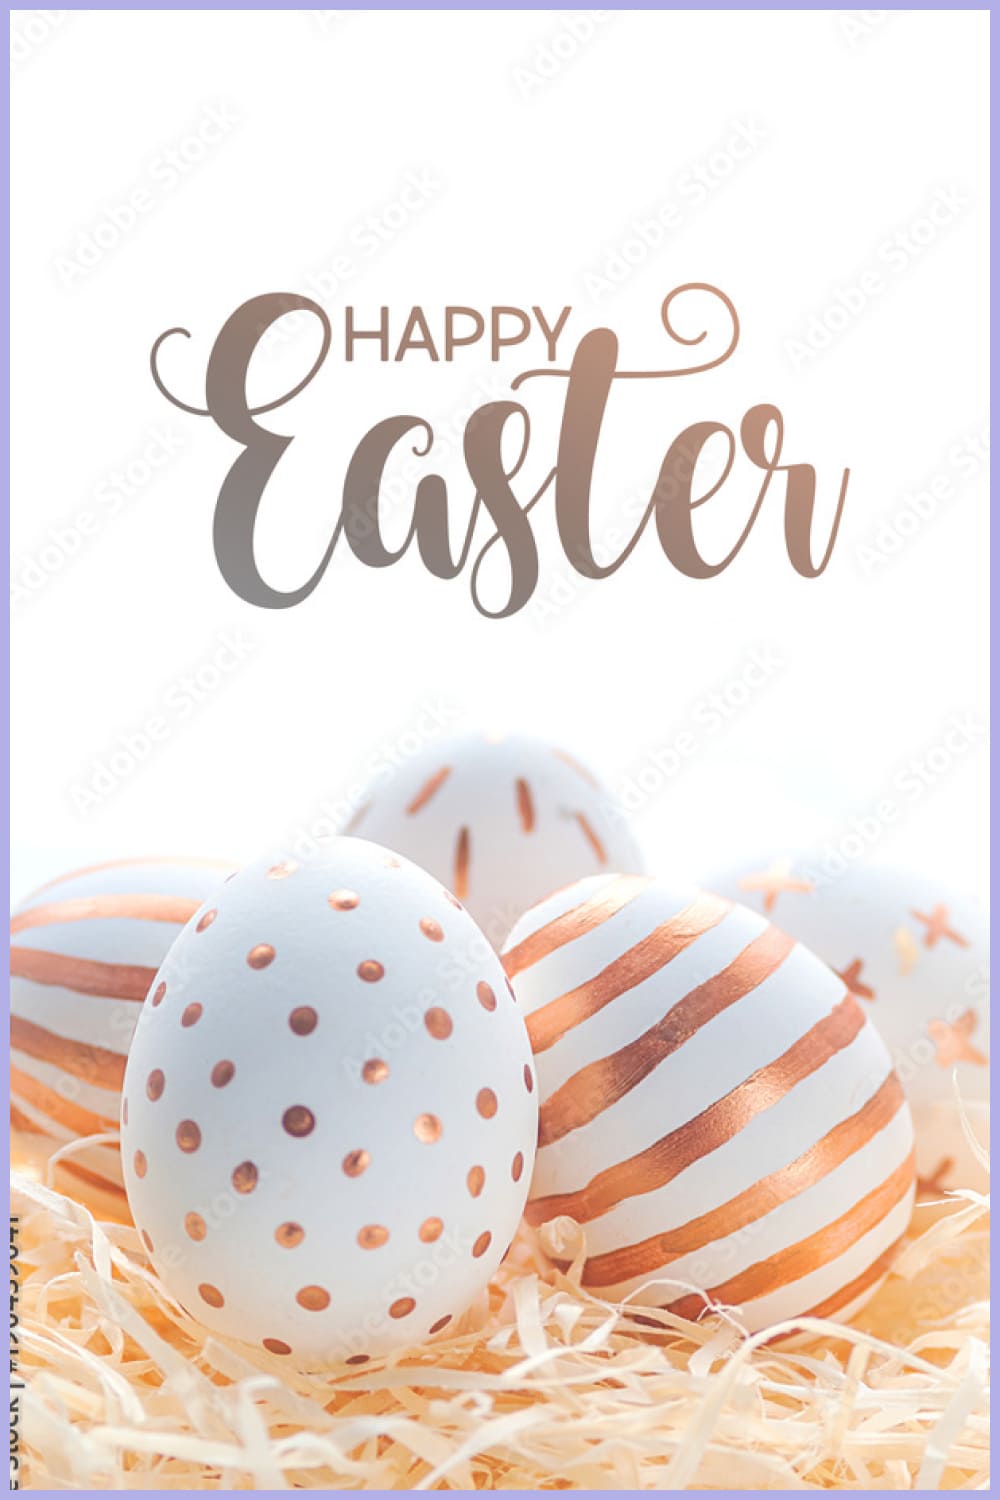 60 Best Happy Easter Images, Stock Photos, Wallpapers in 2023 ...